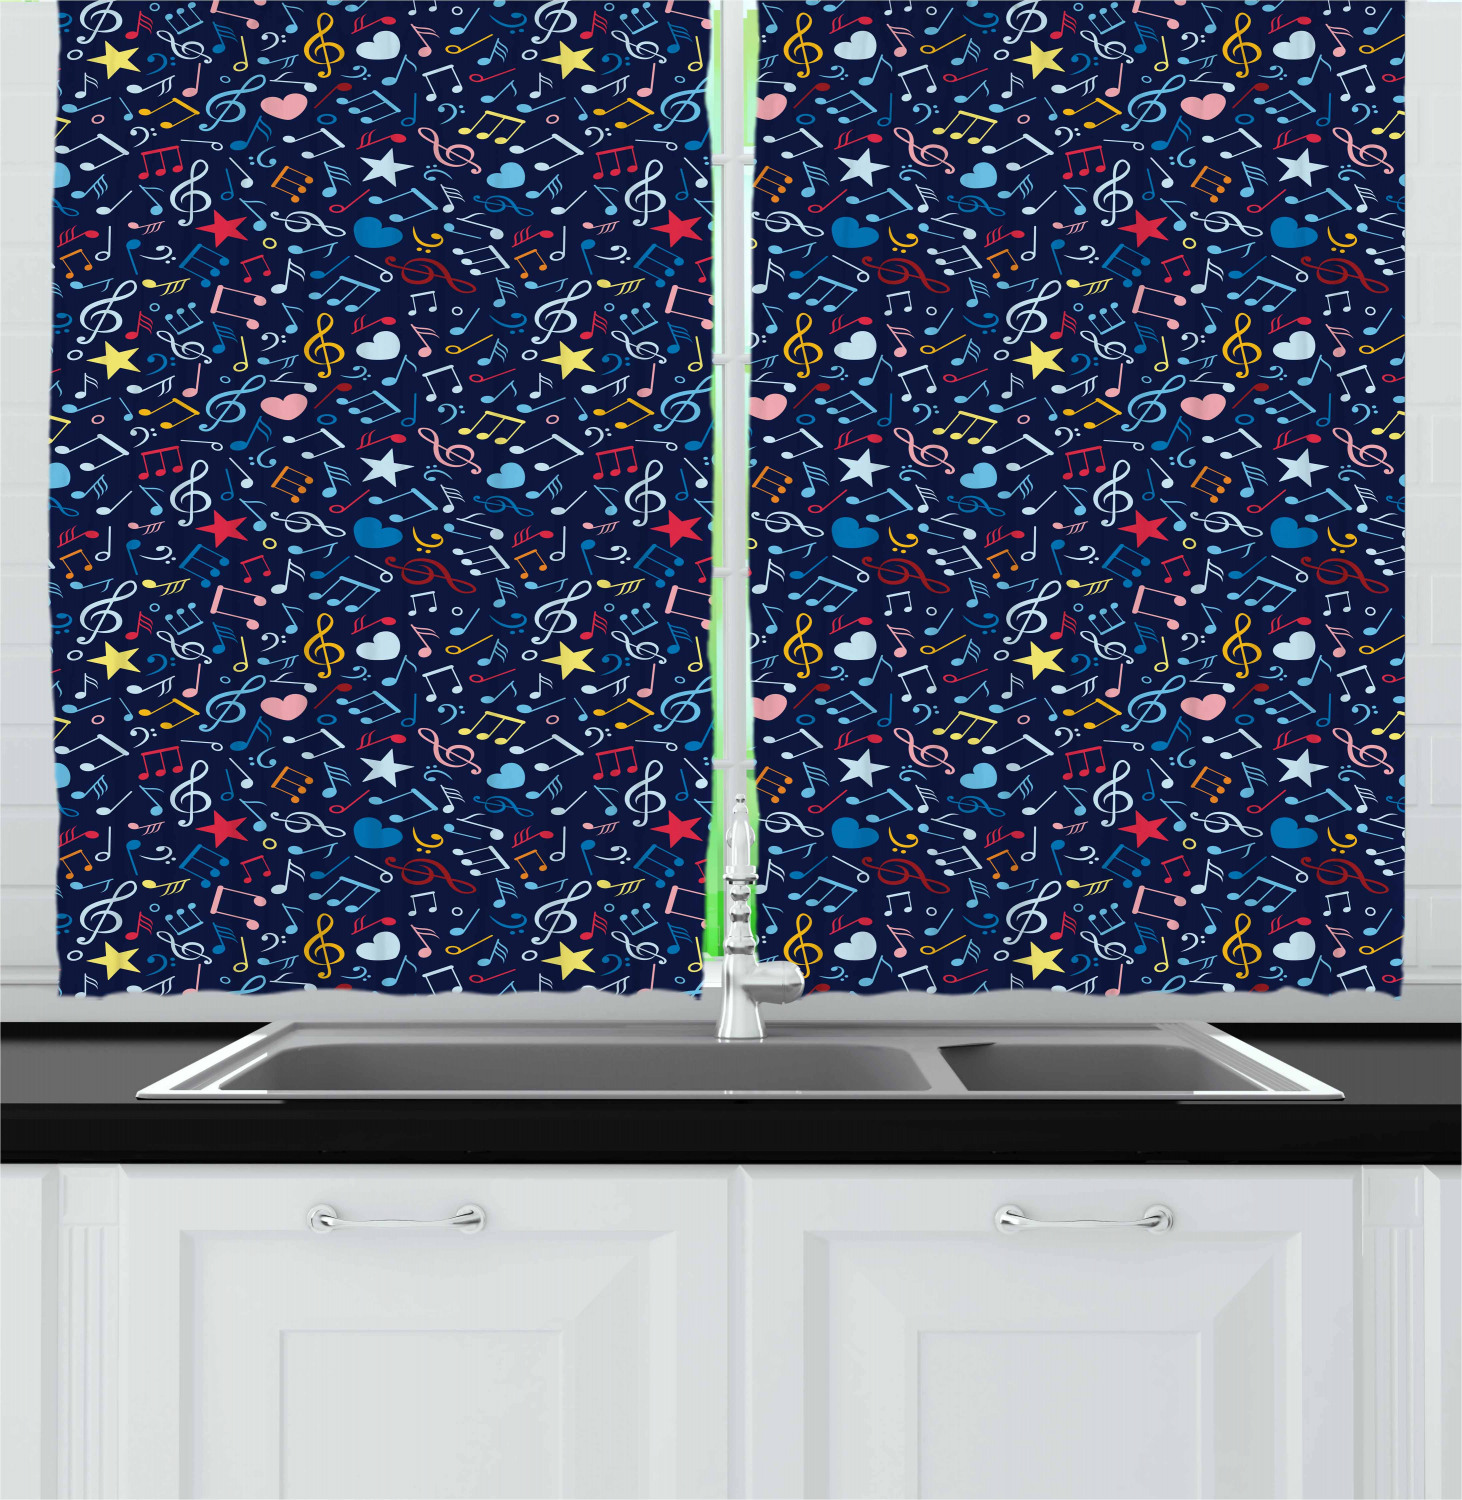 Musical Kitchen Curtains 2 Panel Set Window Drapes 55" X 39" by Ambesonne | eBay